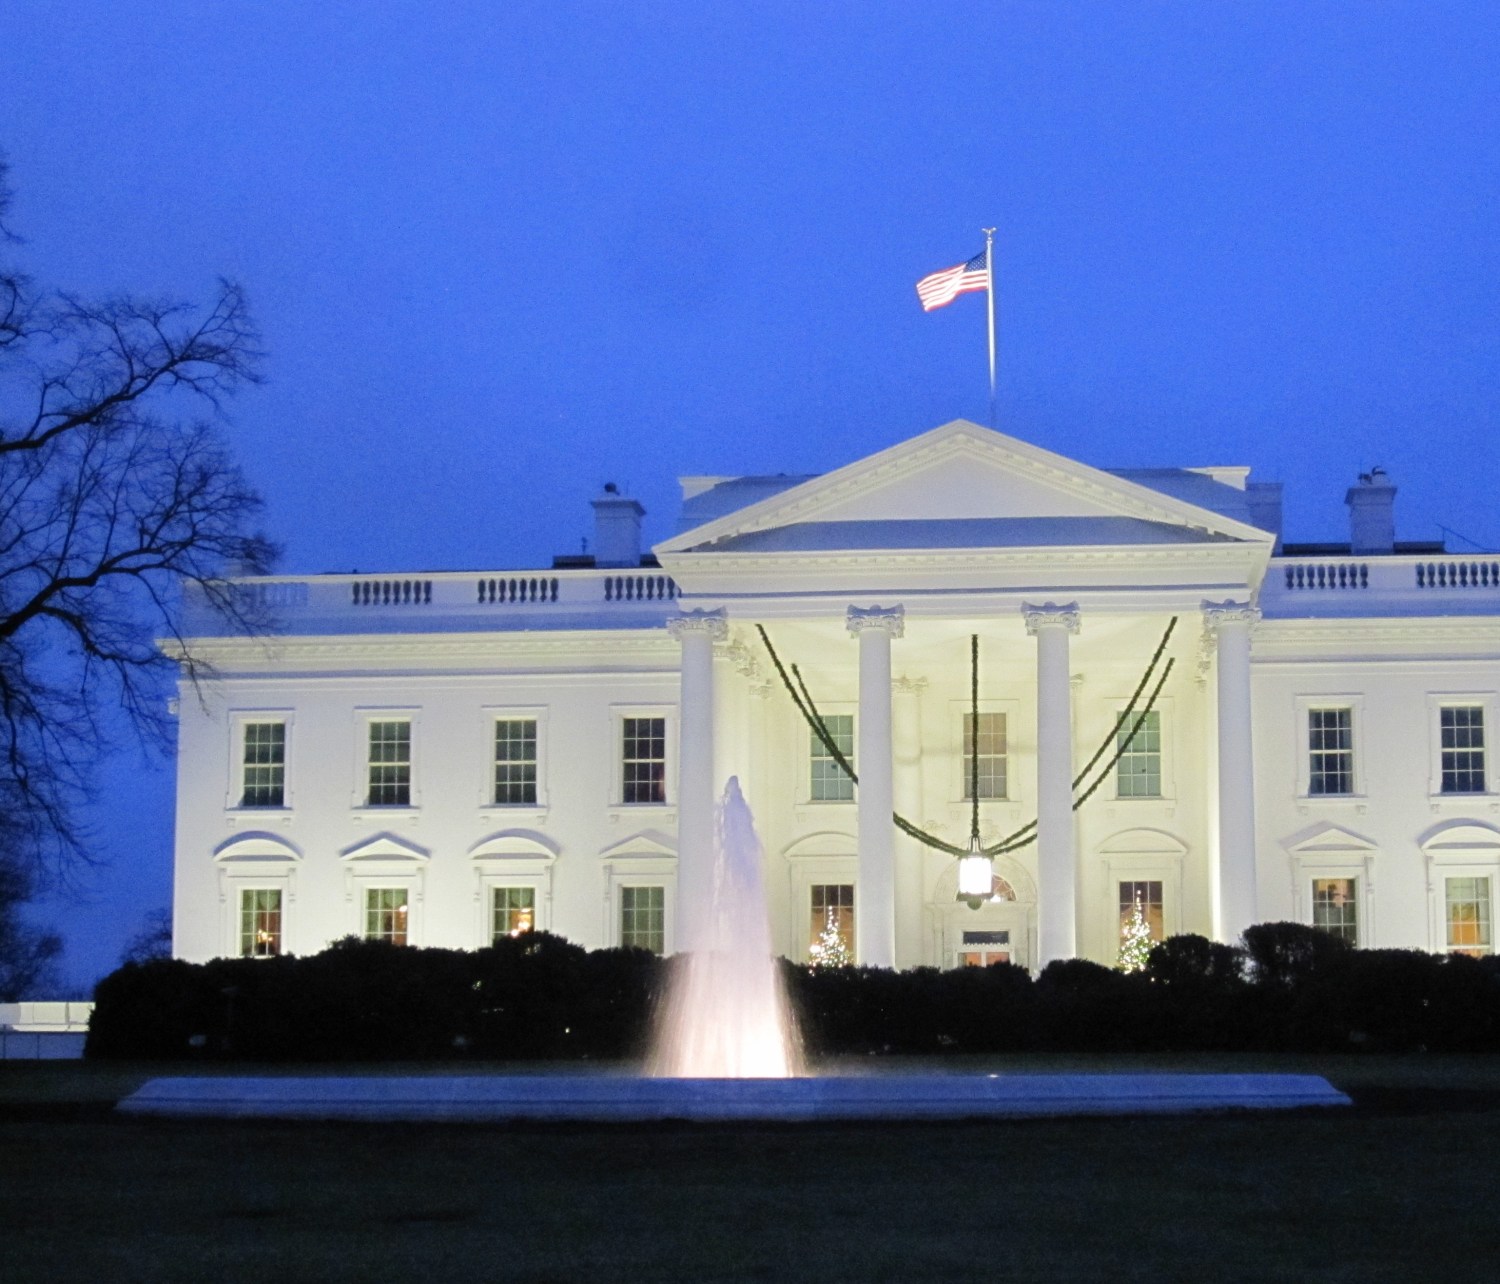 FLICKR/Tom Lohdan -A photo of the front of the White House in twilight taken on December, 25, 2009.